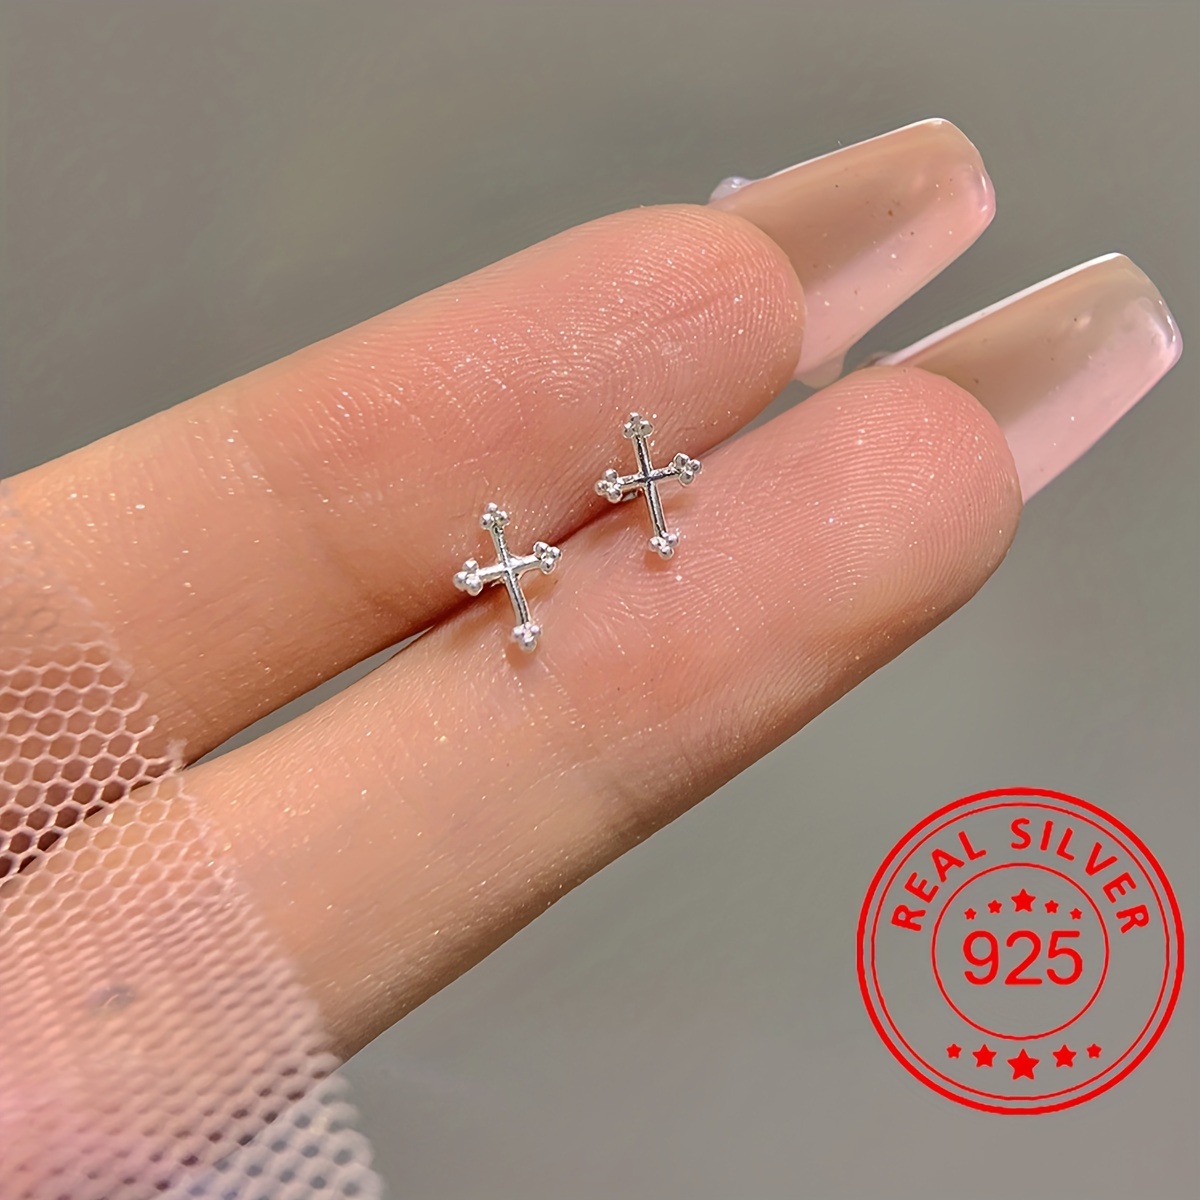 

Sterling 925 Silver Hypoallergenic Ear Jewelry Exquisite Cross Design Stud Earrings Classic Simple Style Delicate Female Gift